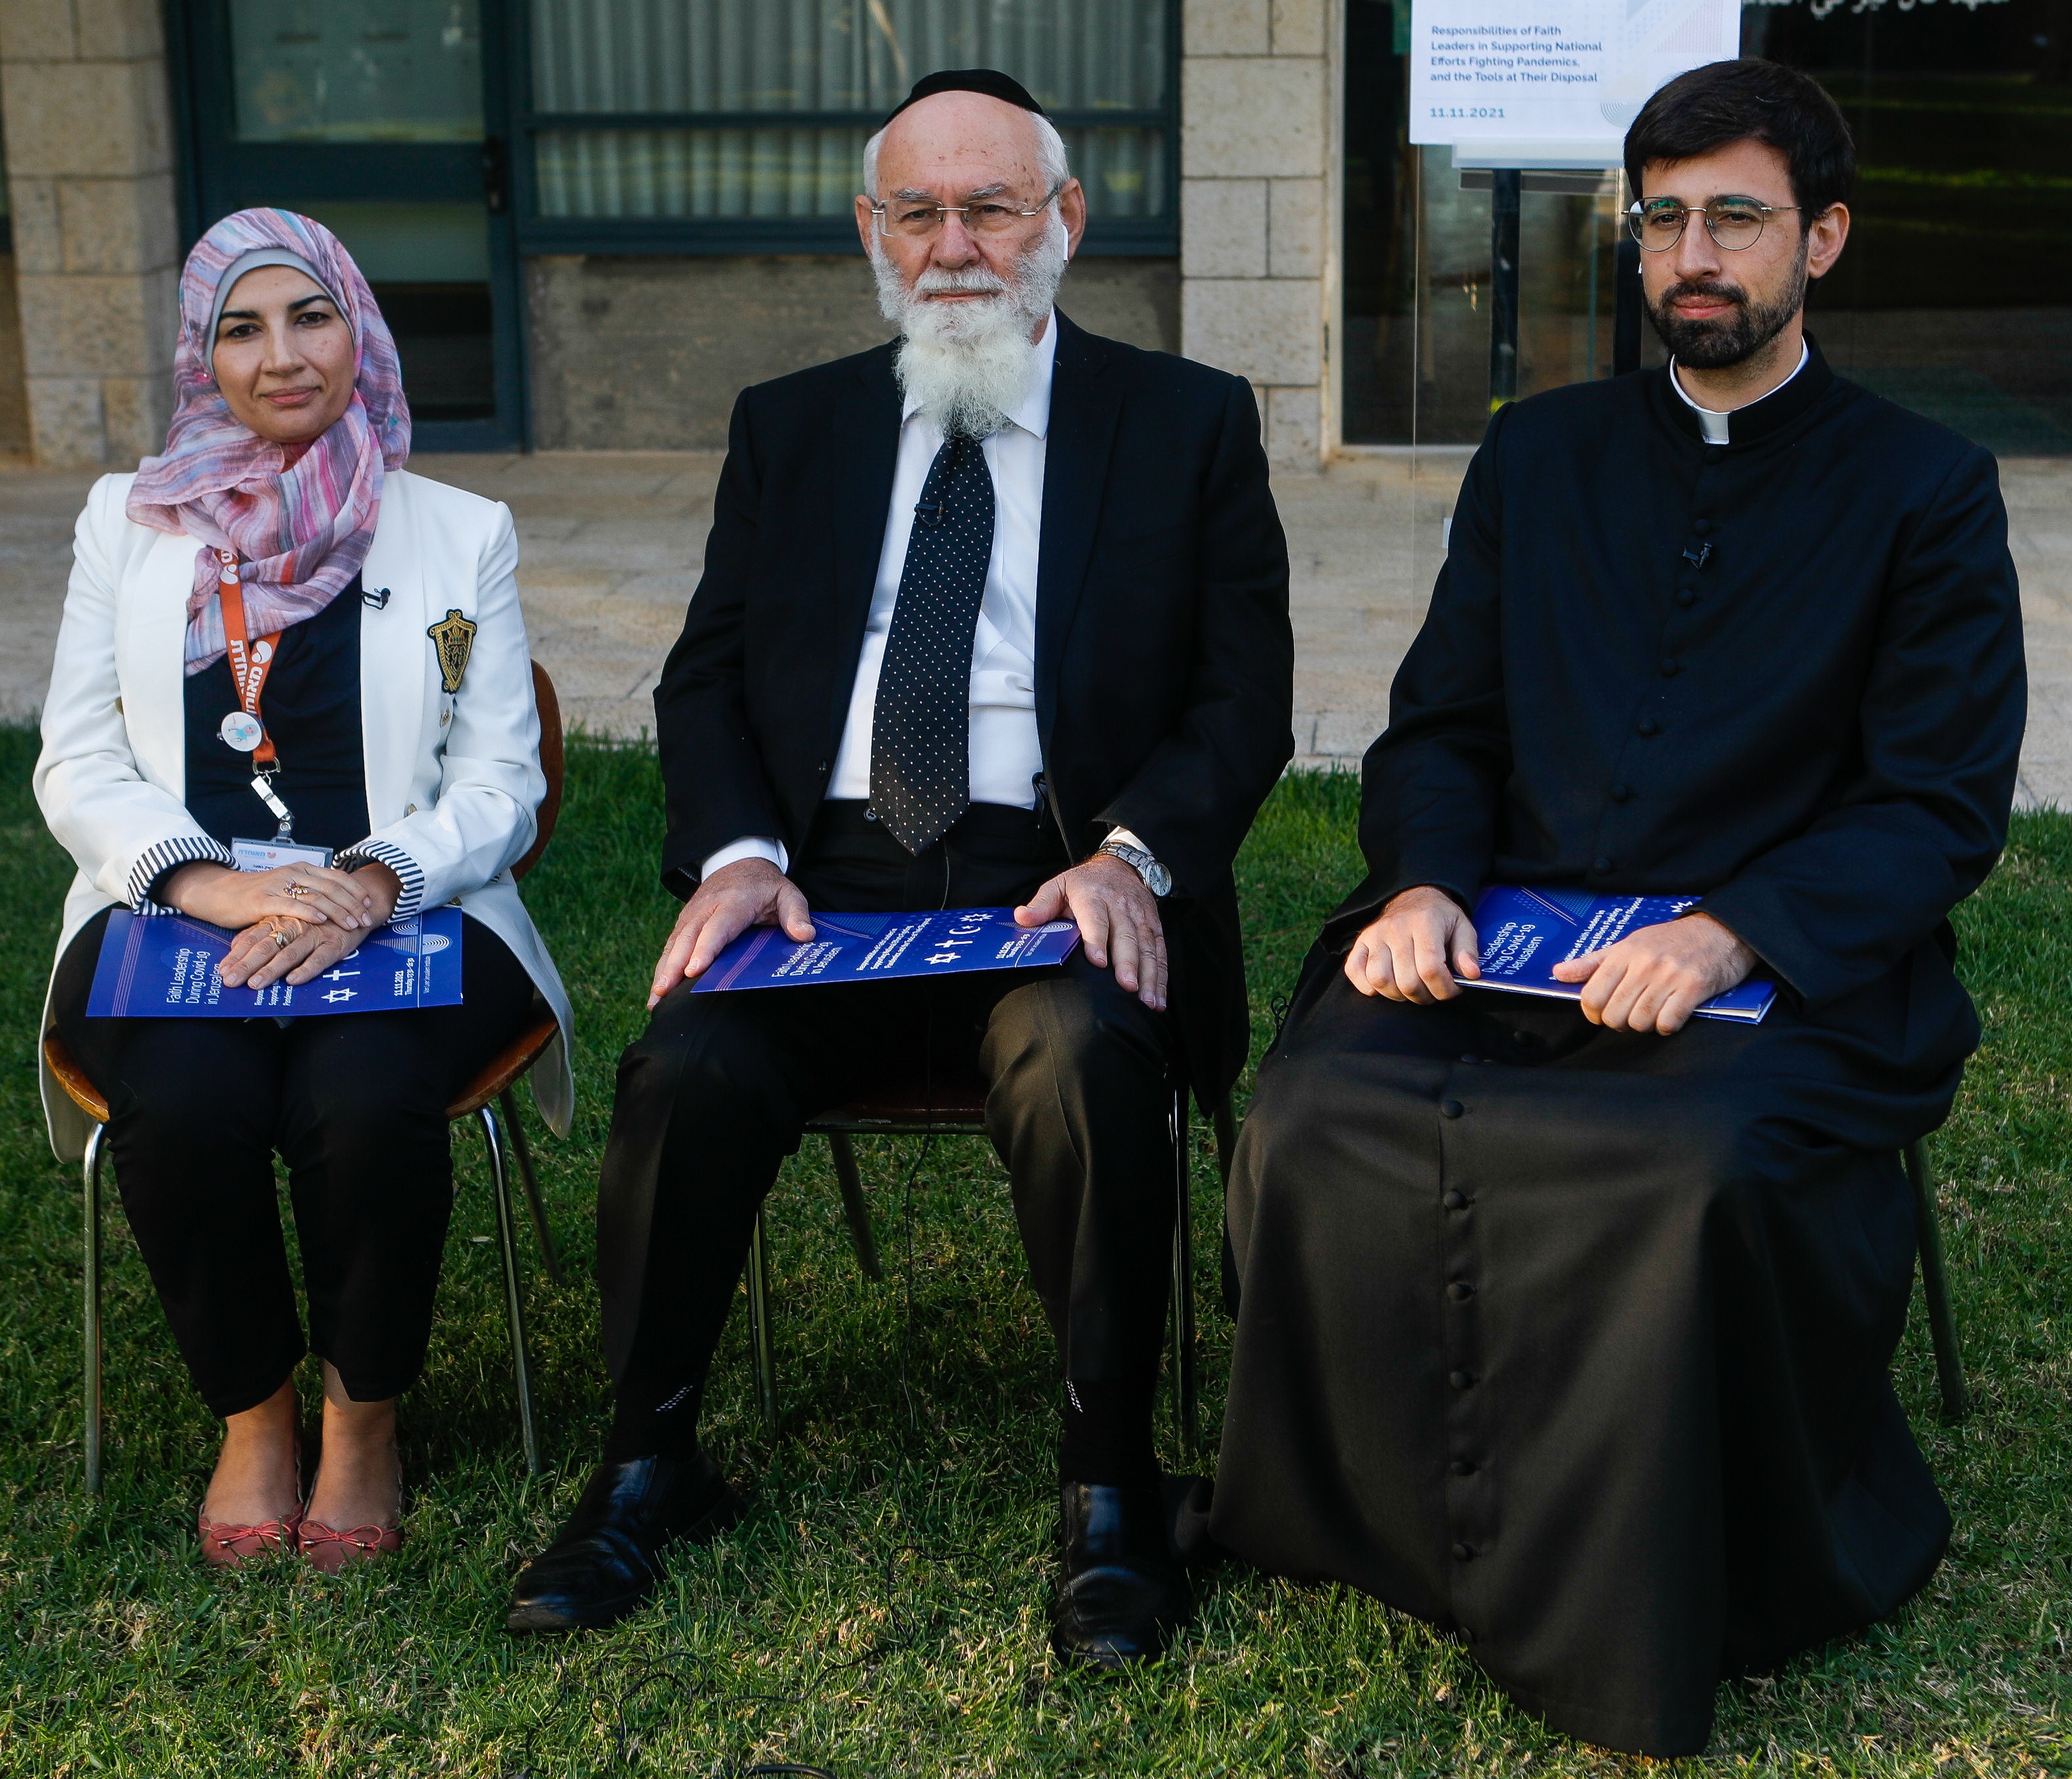 3 Religious leaders sitting on chairs